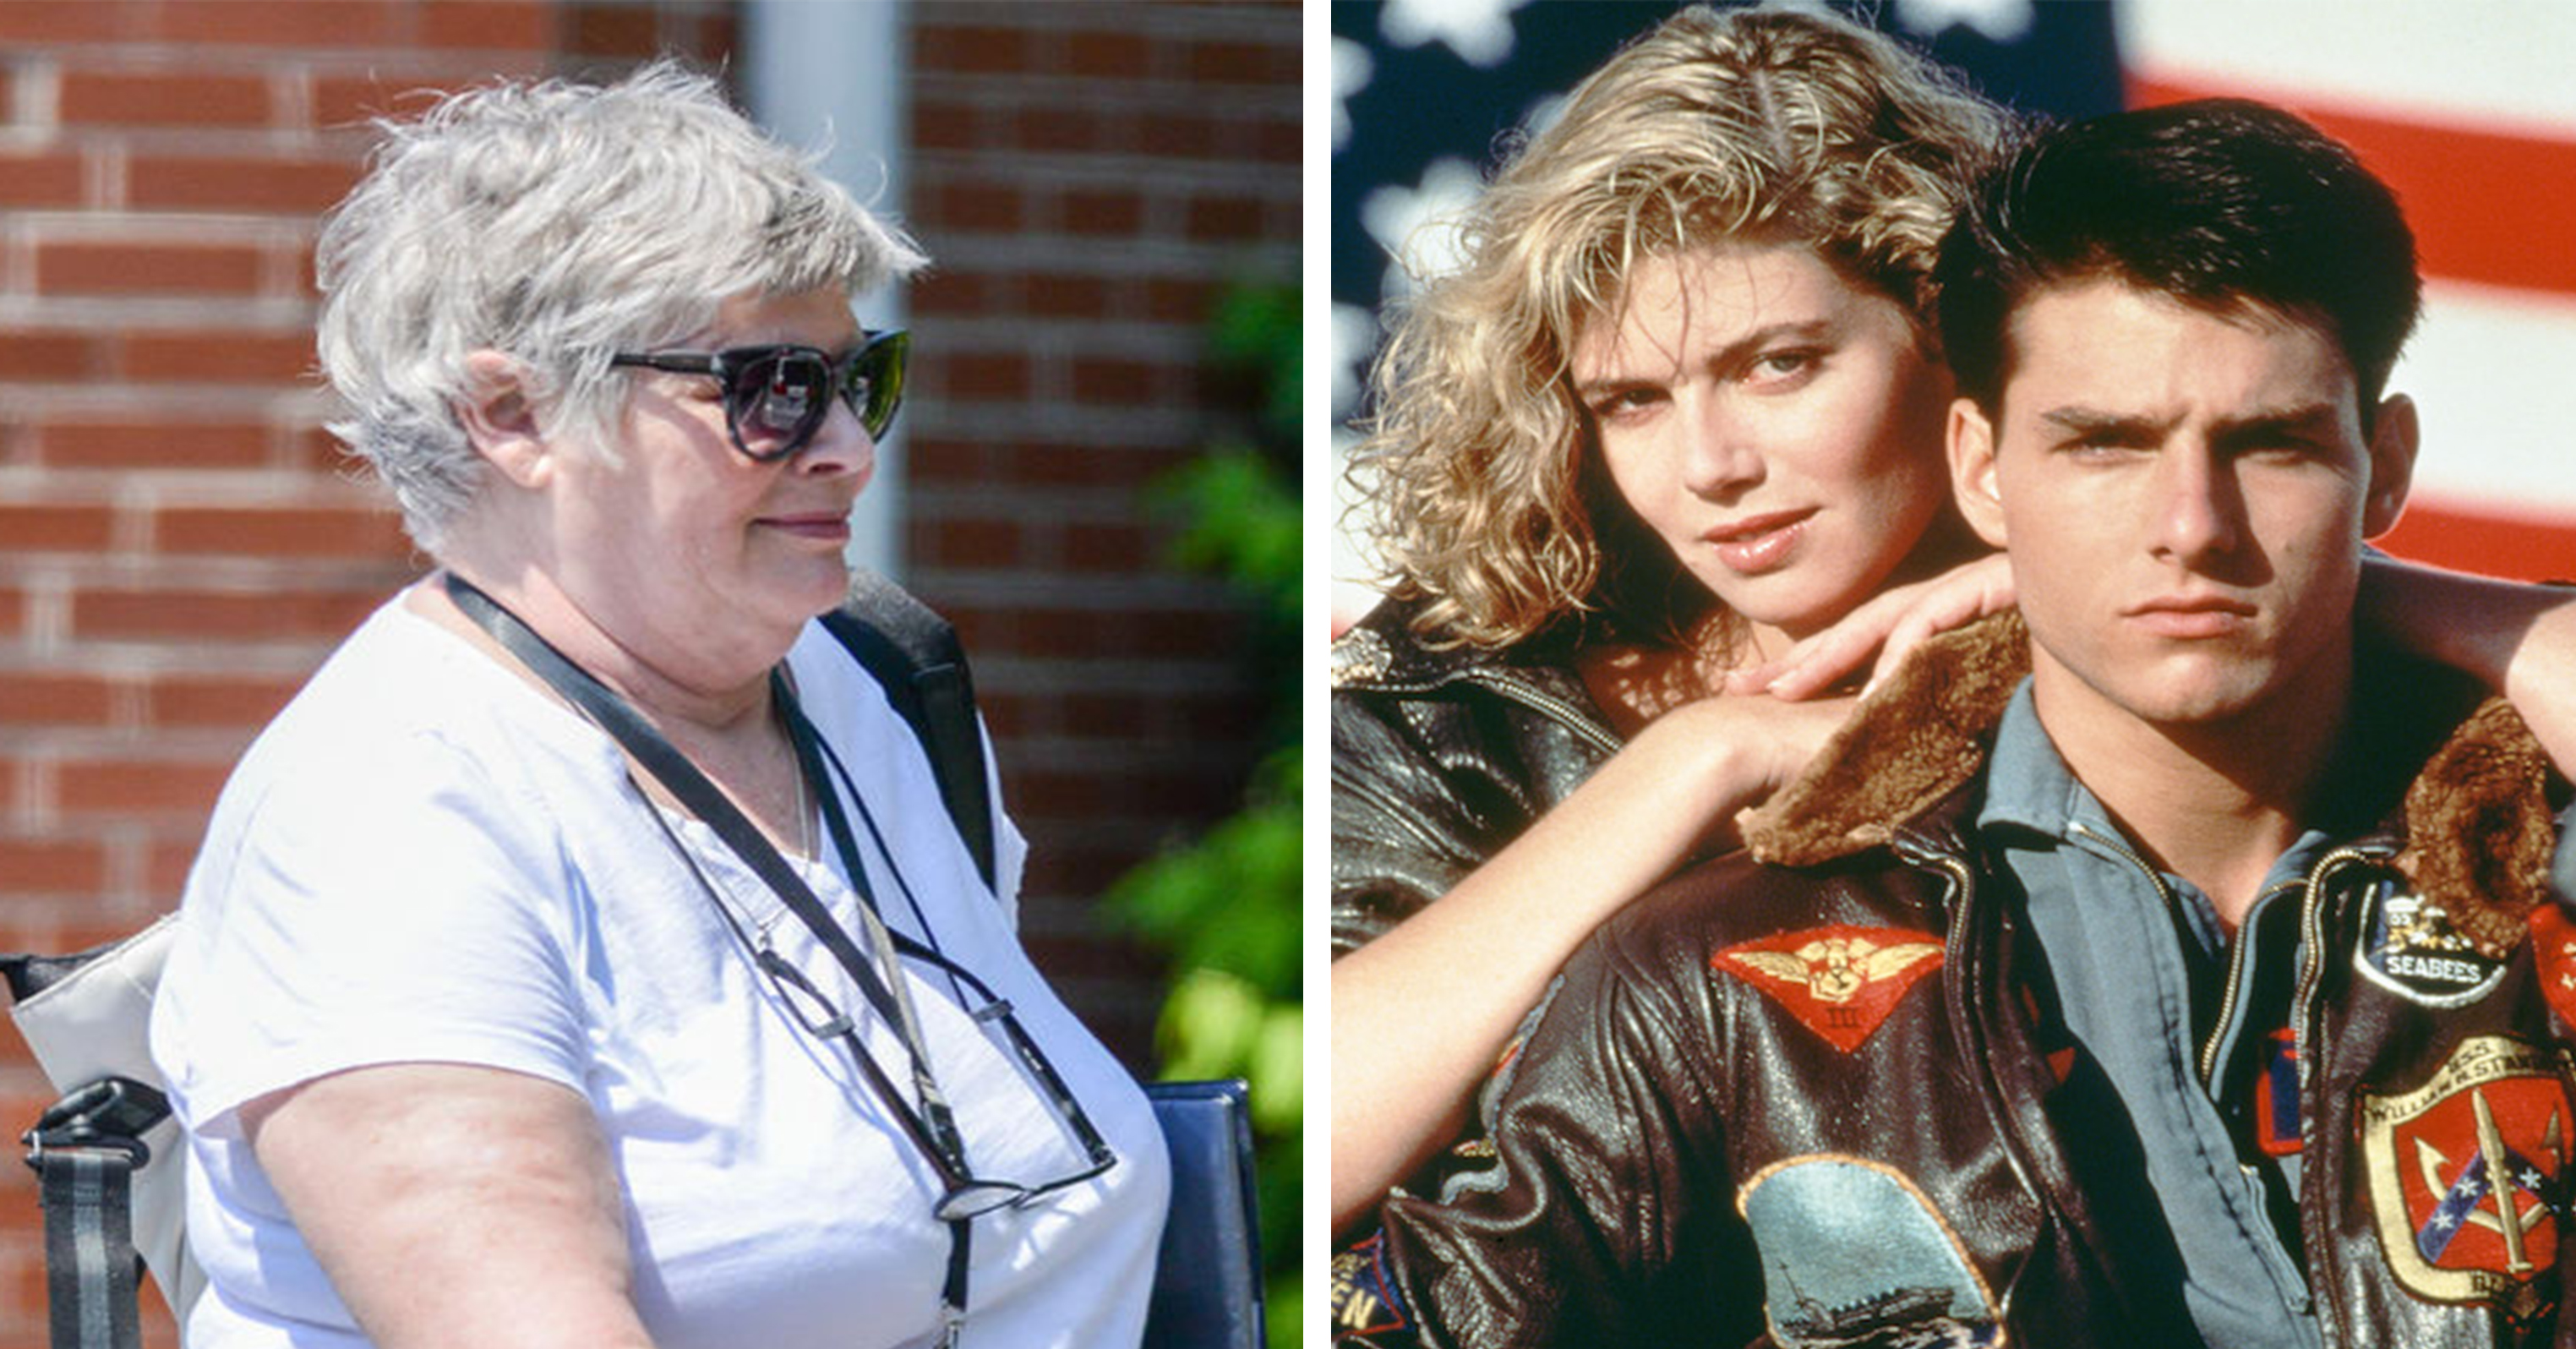 Top Gun's Kelly McGillis Makes Rare Public Appearance During Filming of